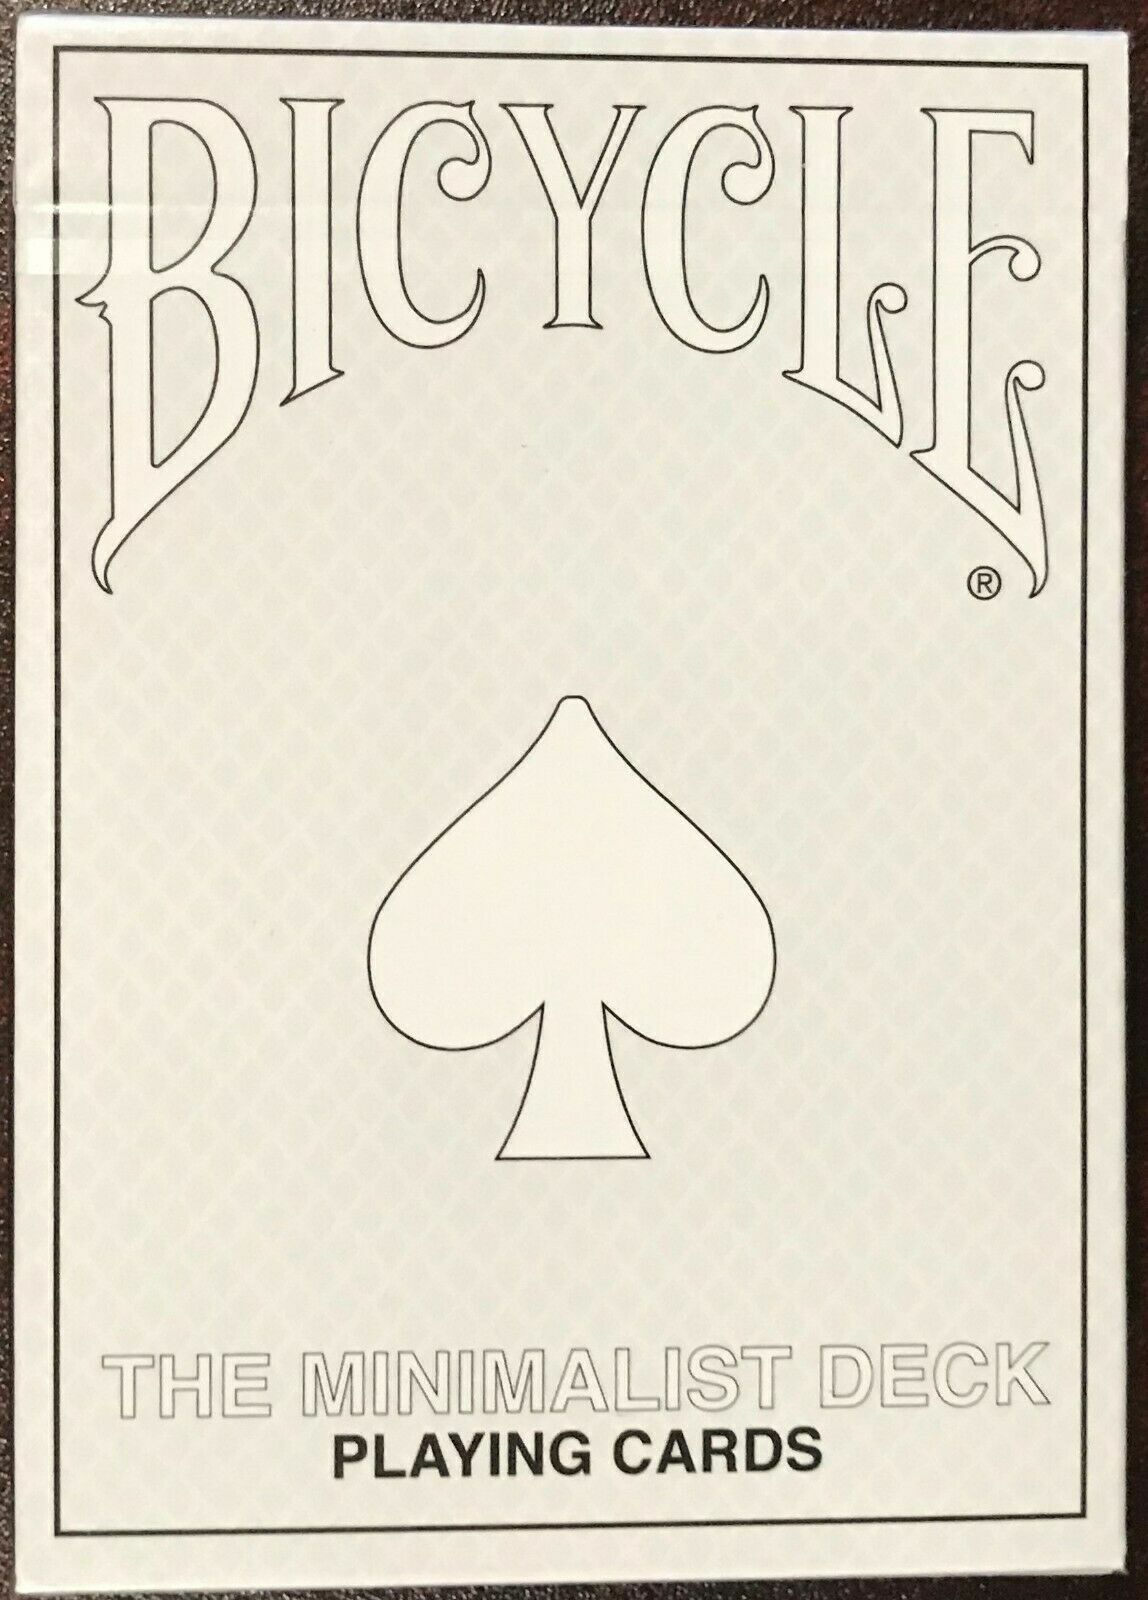 Bicycle The Minimalist Deck - New Playing Card Deck White - 1 in 5000 